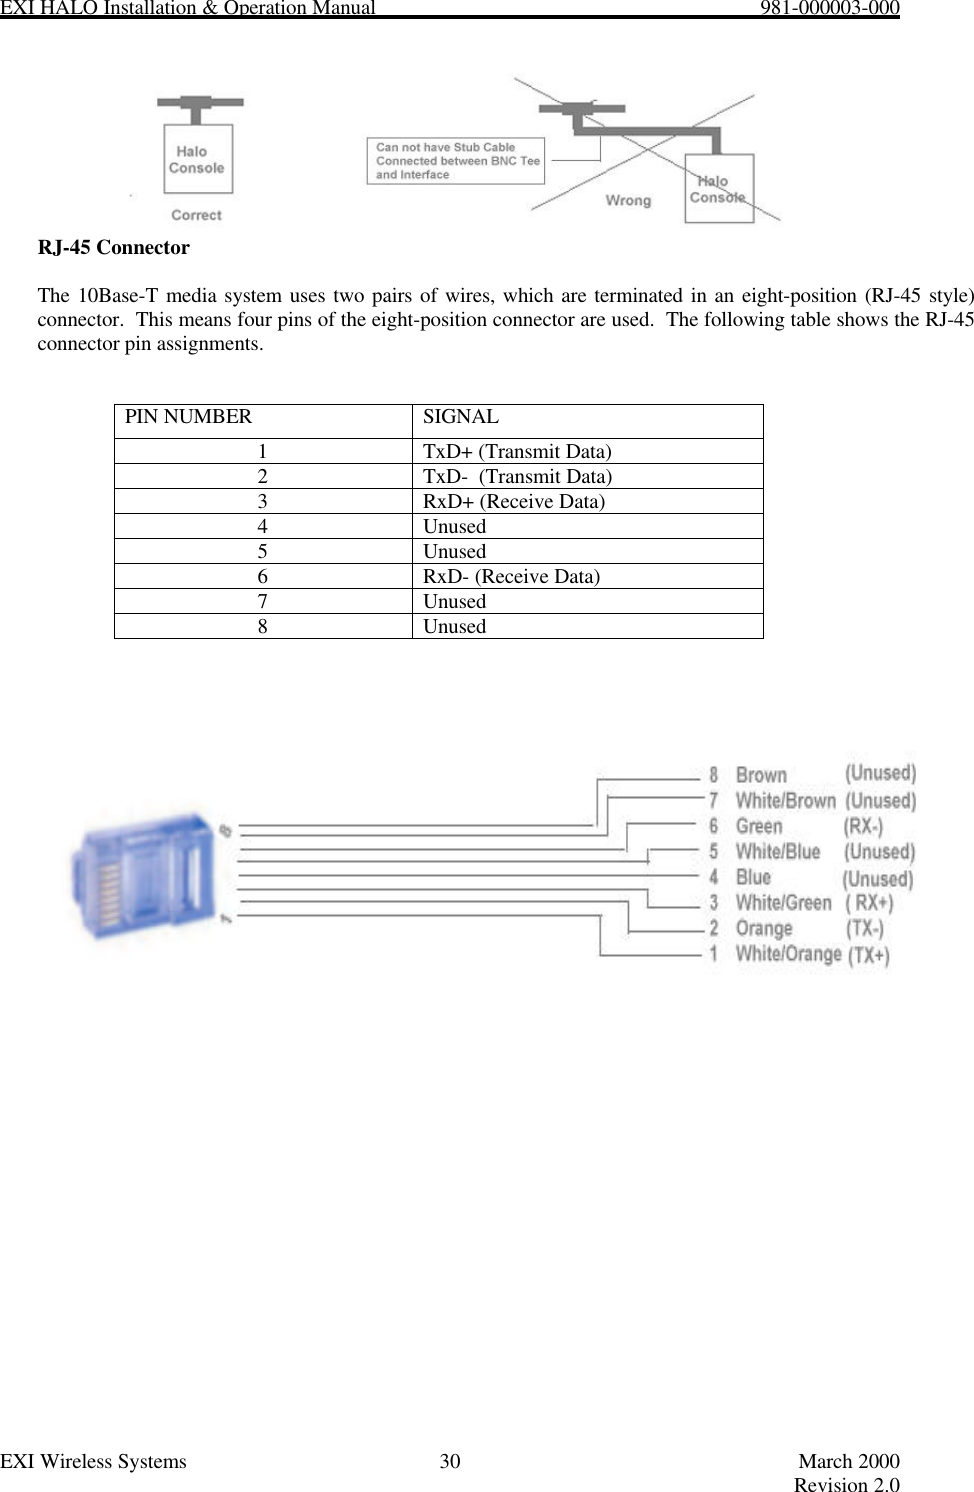 EXI HALO Installation &amp; Operation Manual                                                            981-000003-000EXI Wireless Systems 30 March 2000Revision 2.0RJ-45 ConnectorThe 10Base-T media system uses two pairs of wires, which are terminated in an eight-position (RJ-45 style)connector.  This means four pins of the eight-position connector are used.  The following table shows the RJ-45connector pin assignments.PIN NUMBER SIGNAL1TxD+ (Transmit Data)2TxD-  (Transmit Data)3RxD+ (Receive Data)4Unused5Unused6RxD- (Receive Data)7Unused8Unused